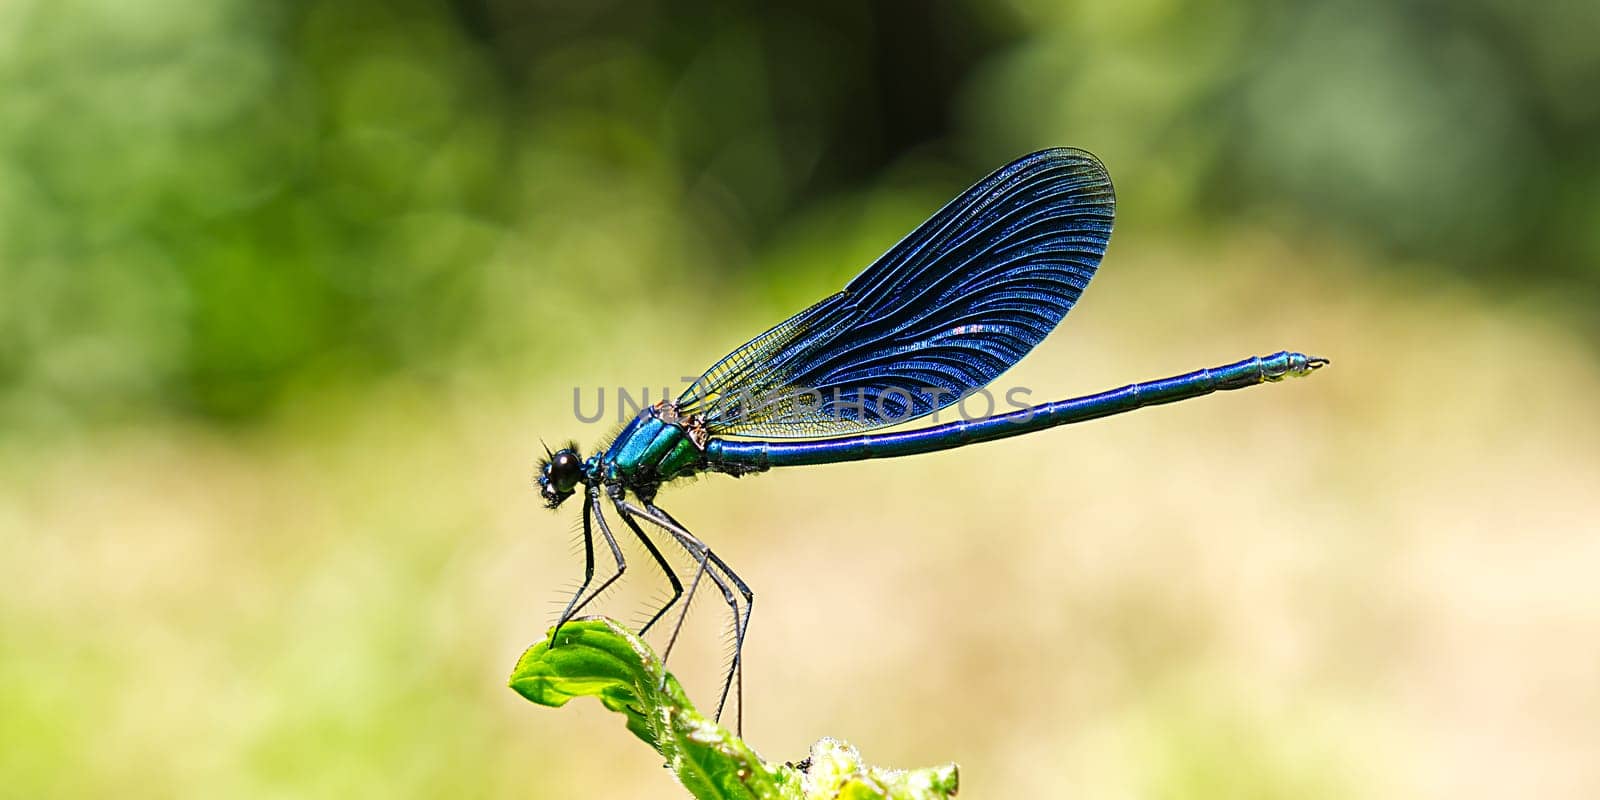 Black, Blue dragonfly close up SOA deep blue dragonfly sits on the grass dragonfly in nature habitat by PhotoTime